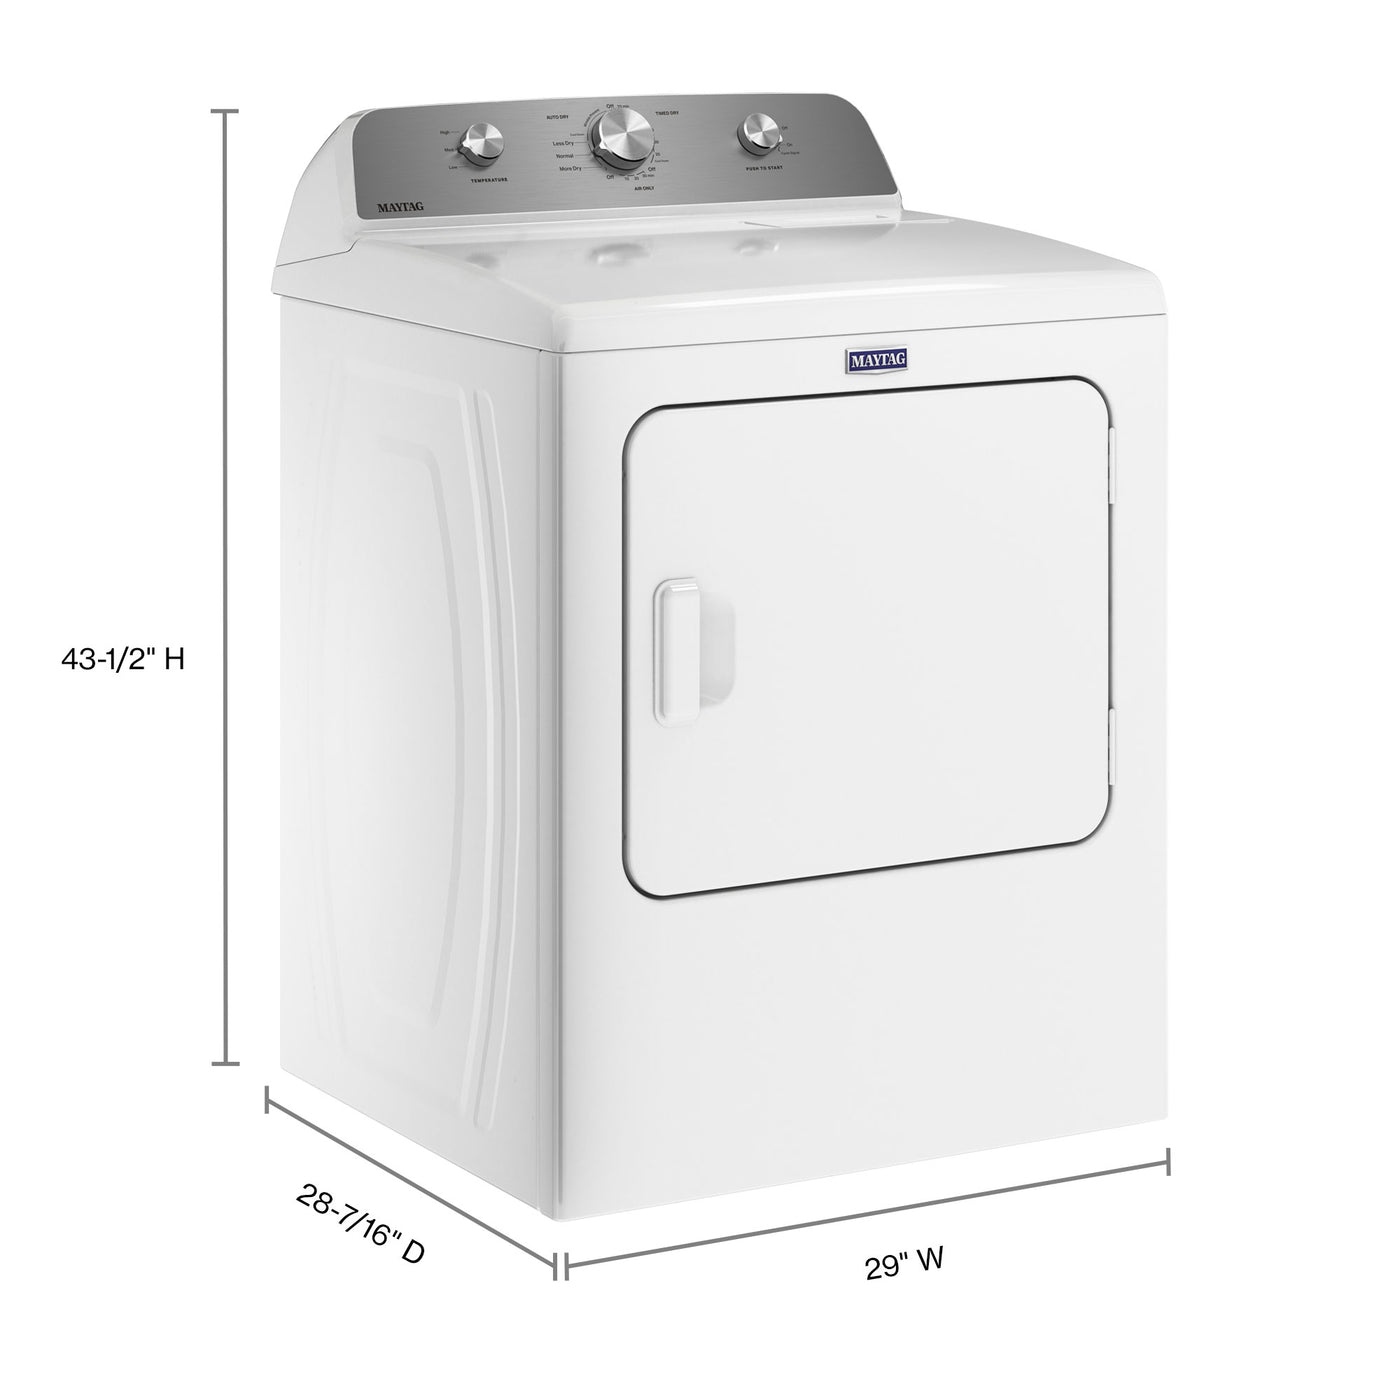 Maytag White Gas Wrinkle Prevent Dryer (7.0 cu. ft.) - MGD4500MW